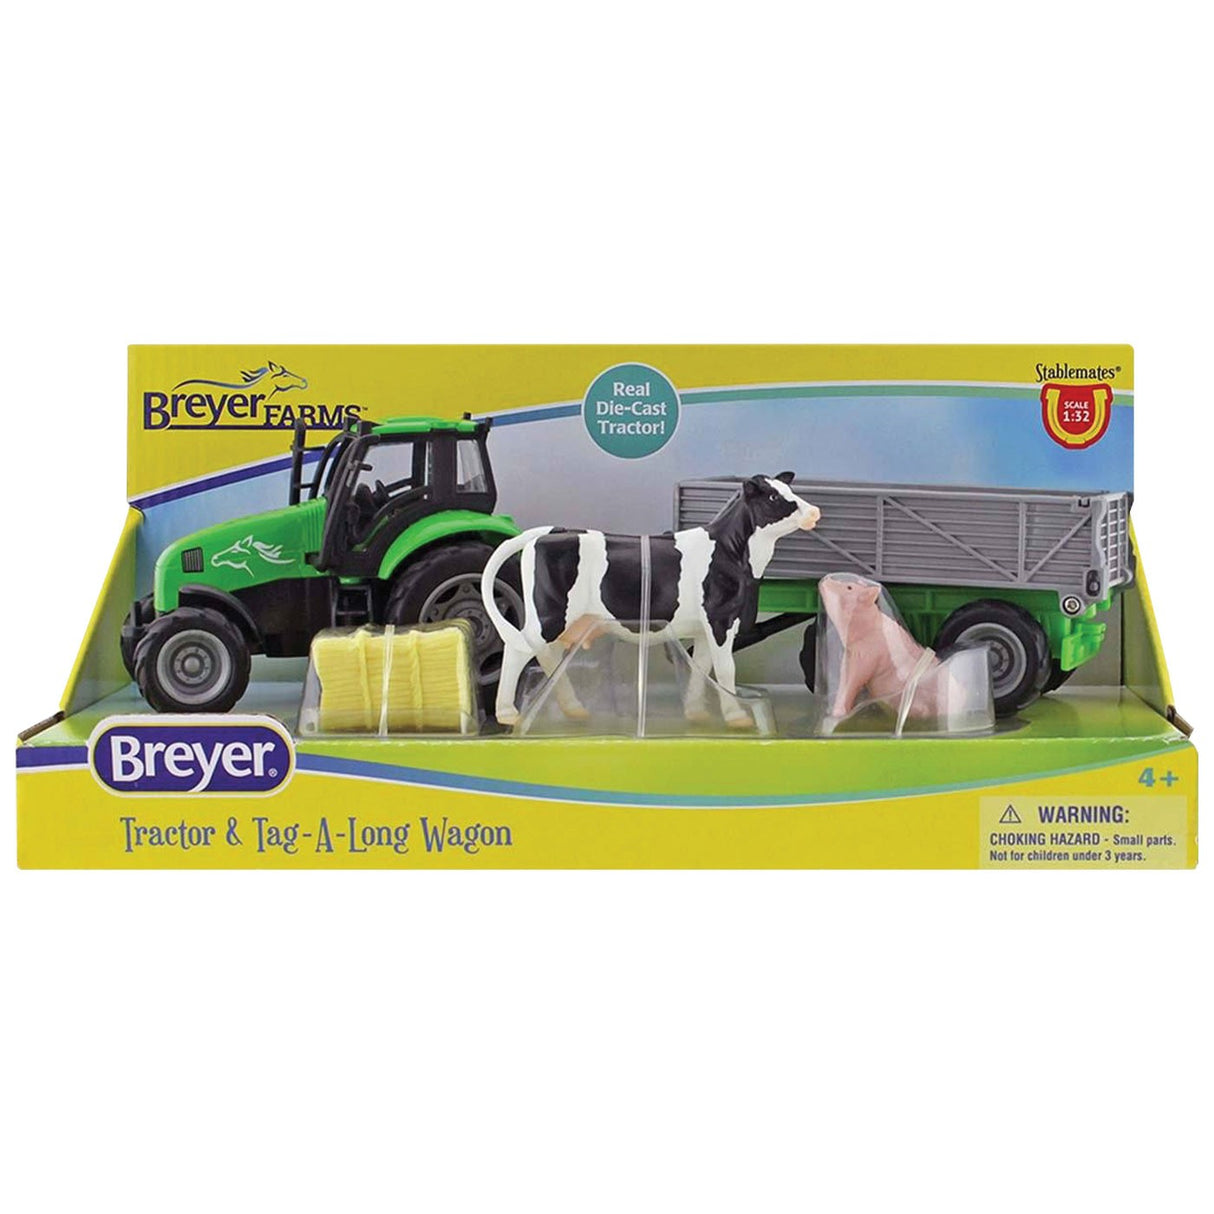 Breyer Stablemates Tractor & Tag-A-Long Wagon